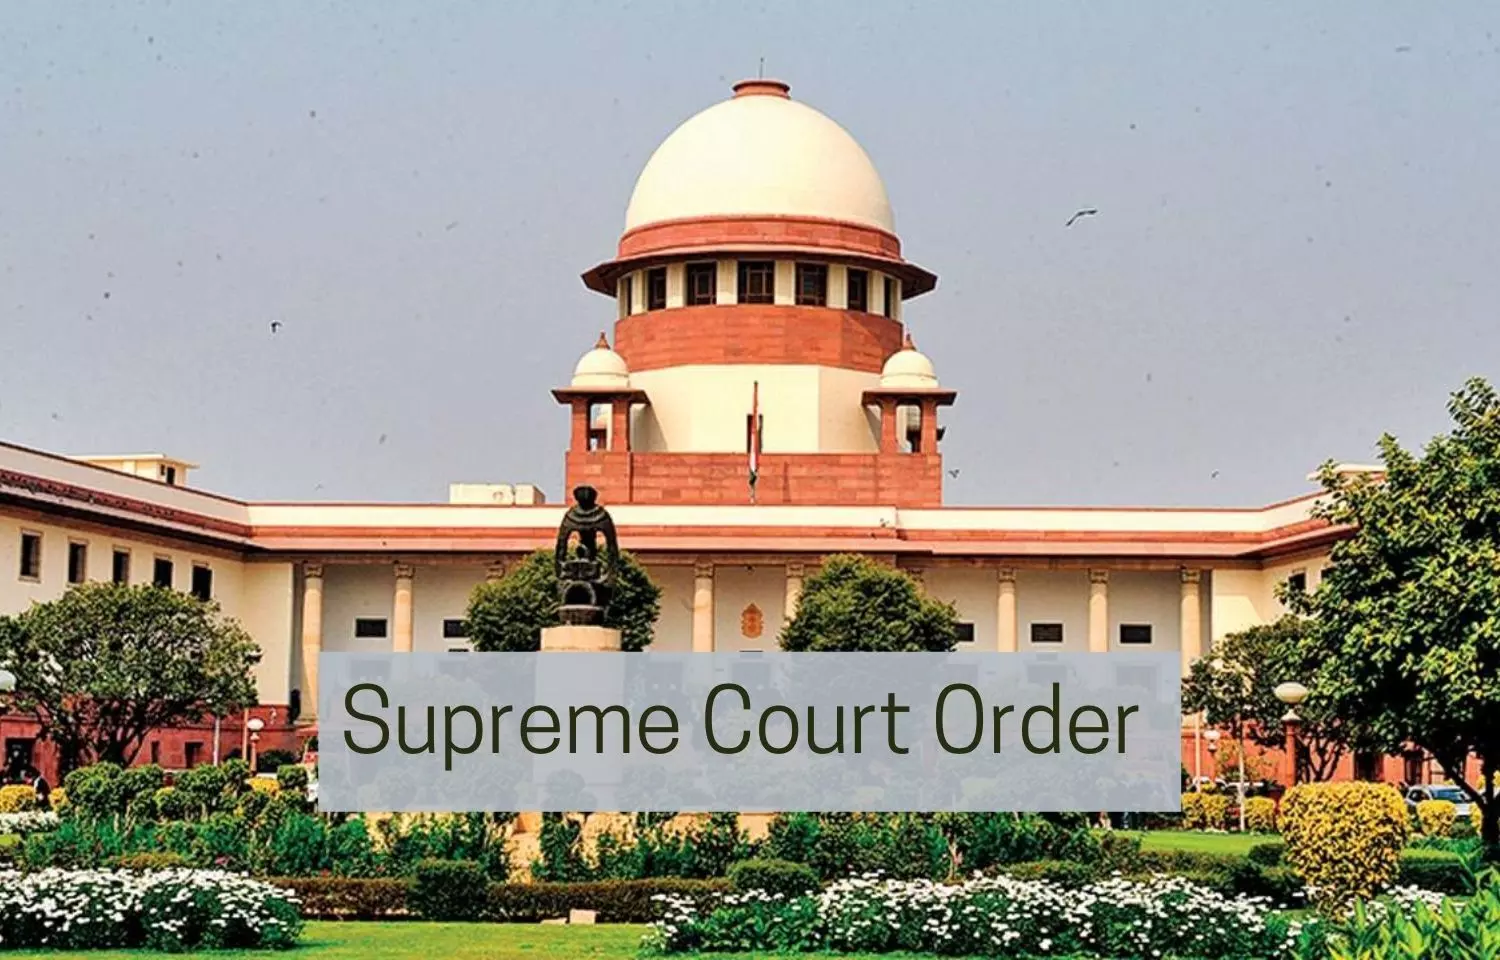 Carry out fresh verification of MBBS aspirants who claimed as NRI Candidates: SC tells Kerala